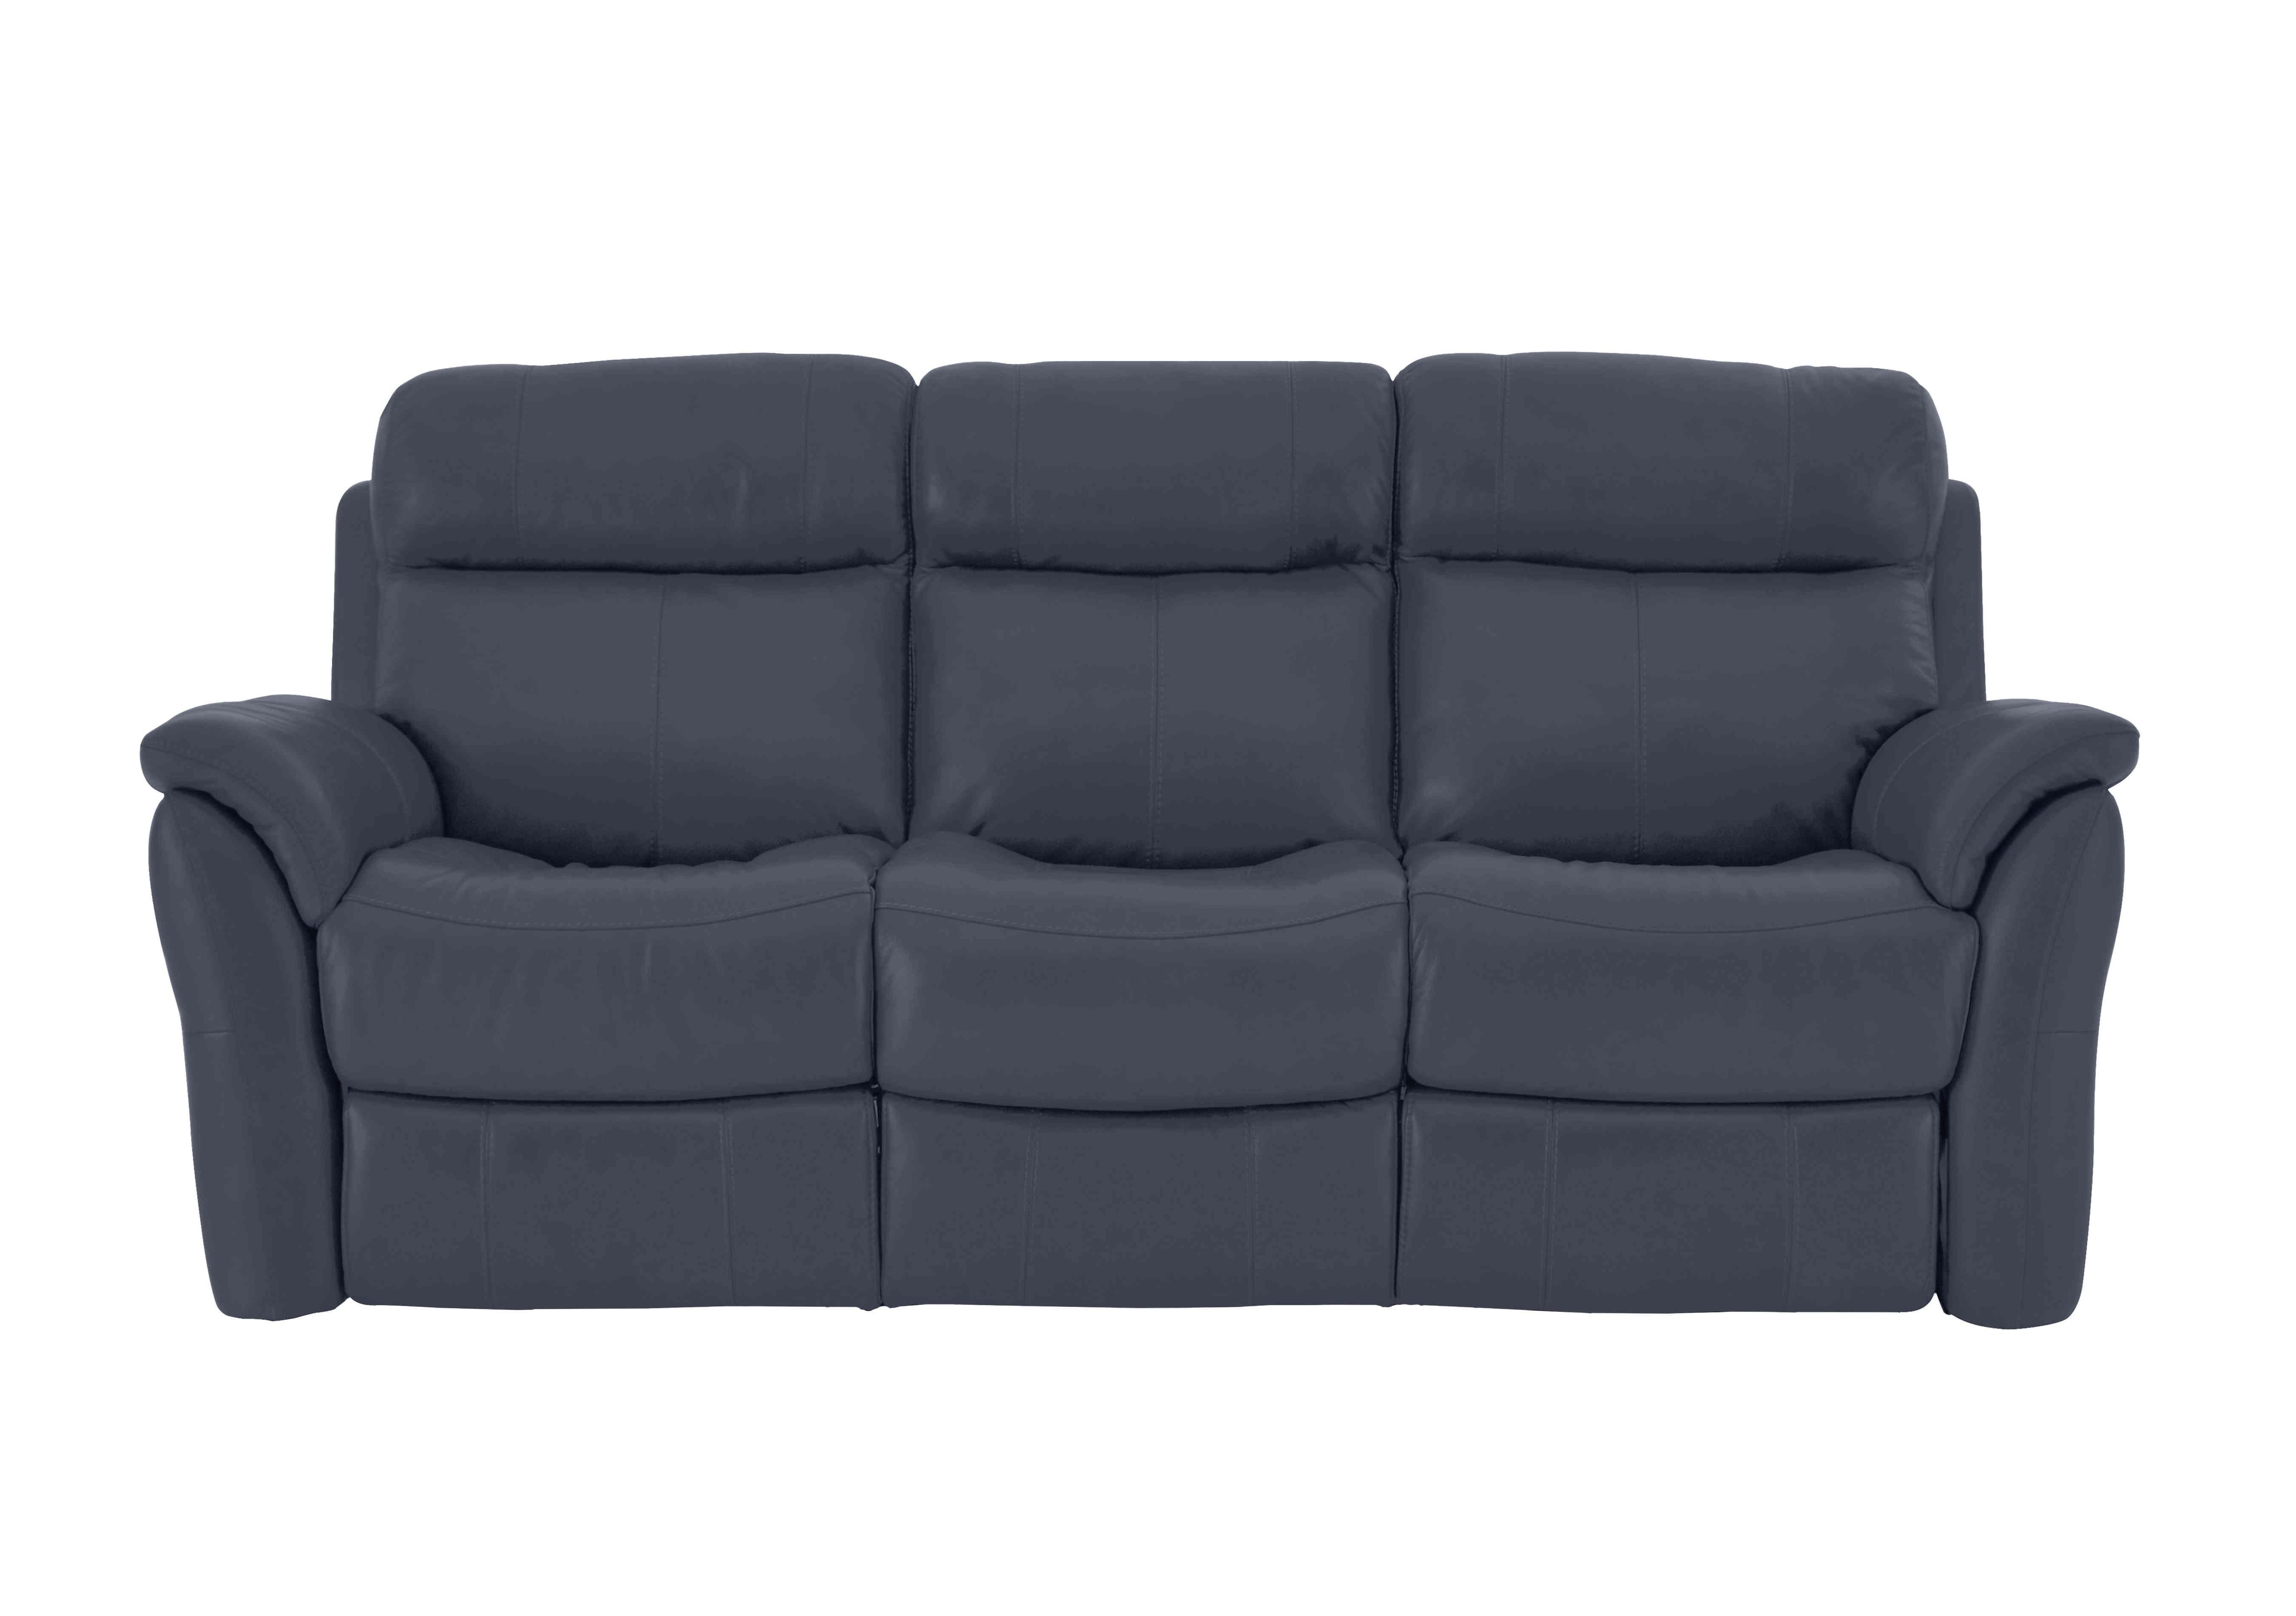 Relax Station Revive 3 Seater Leather Sofa in Bv-313e Ocean Blue on Furniture Village